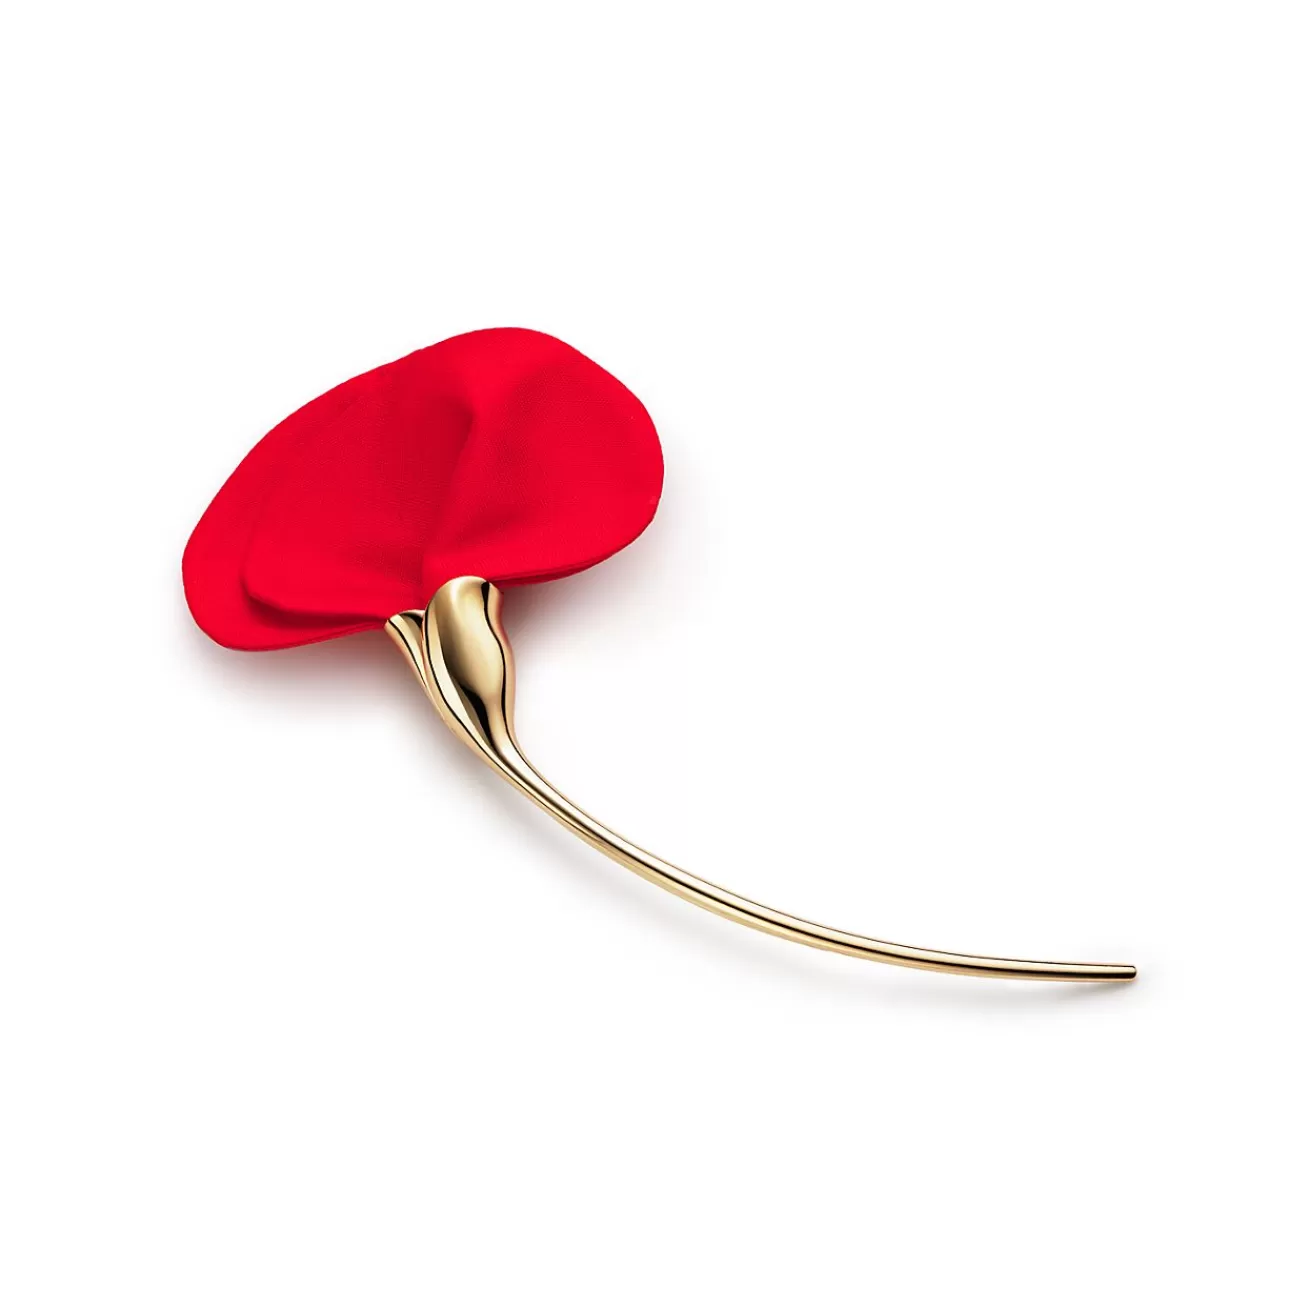 Tiffany & Co. Elsa Peretti® Amapola brooch in 18k gold with red silk. | ^ Brooches | Gold Jewelry